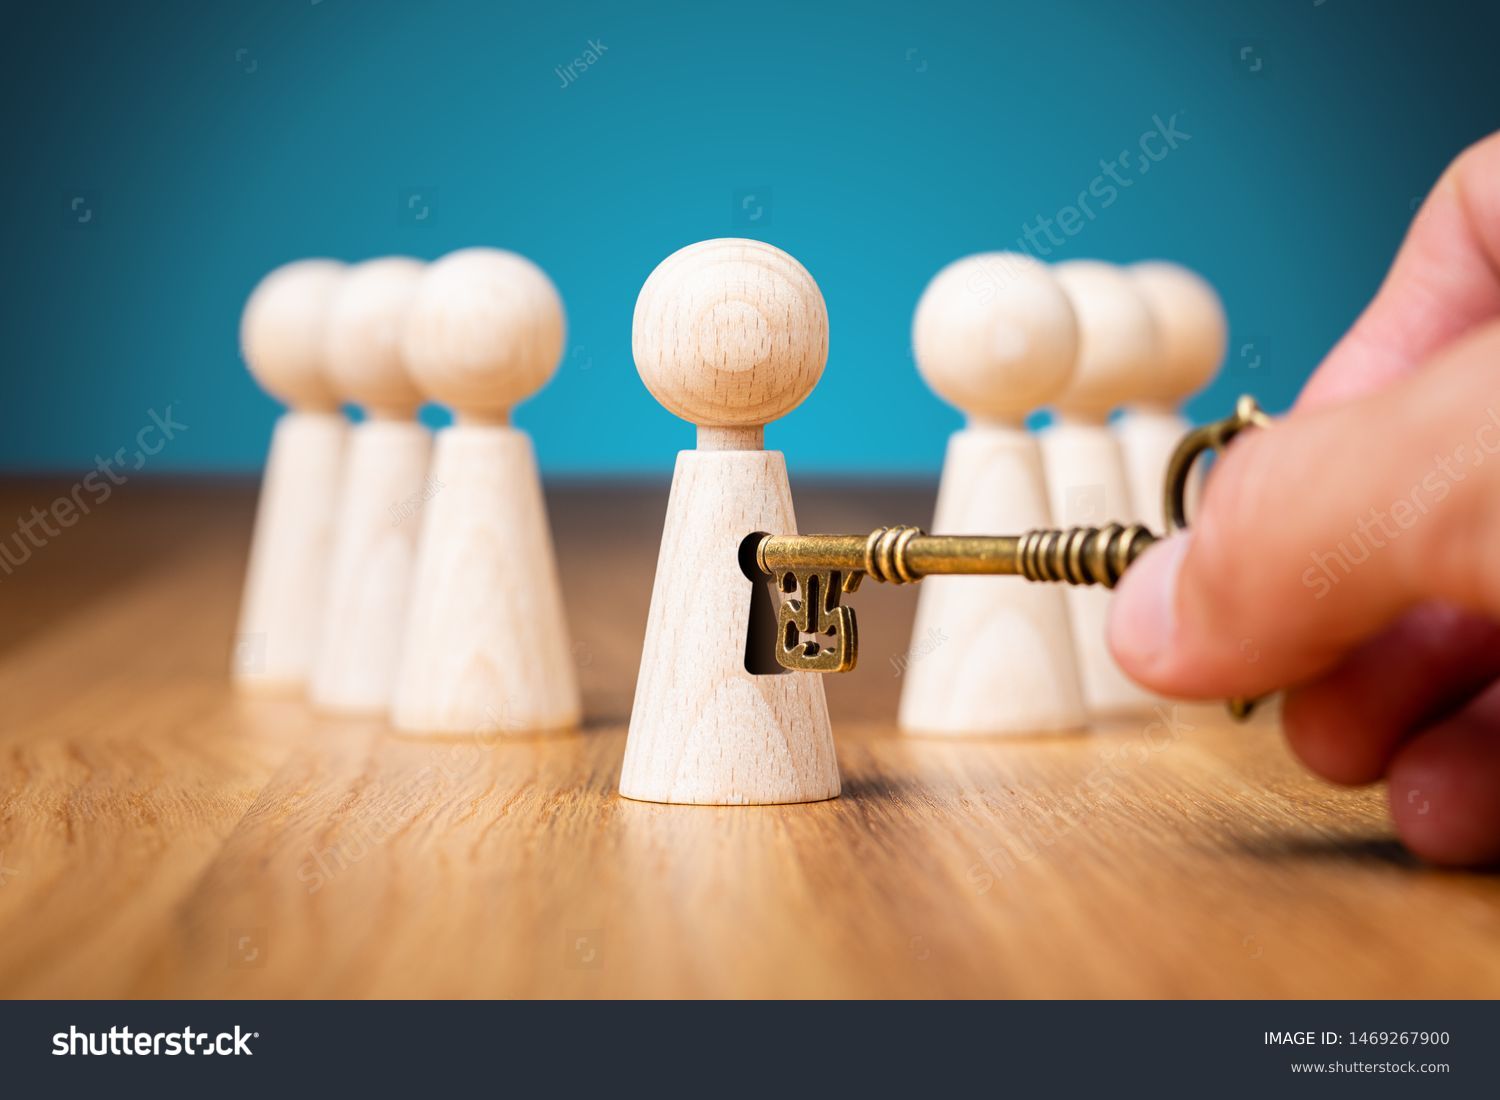 Coach unlock potential - motivation concept. Coach (manager, mentor, HR specialist) unlock leader potential and talent represented by wooden figurine and hand with key. #1469267900